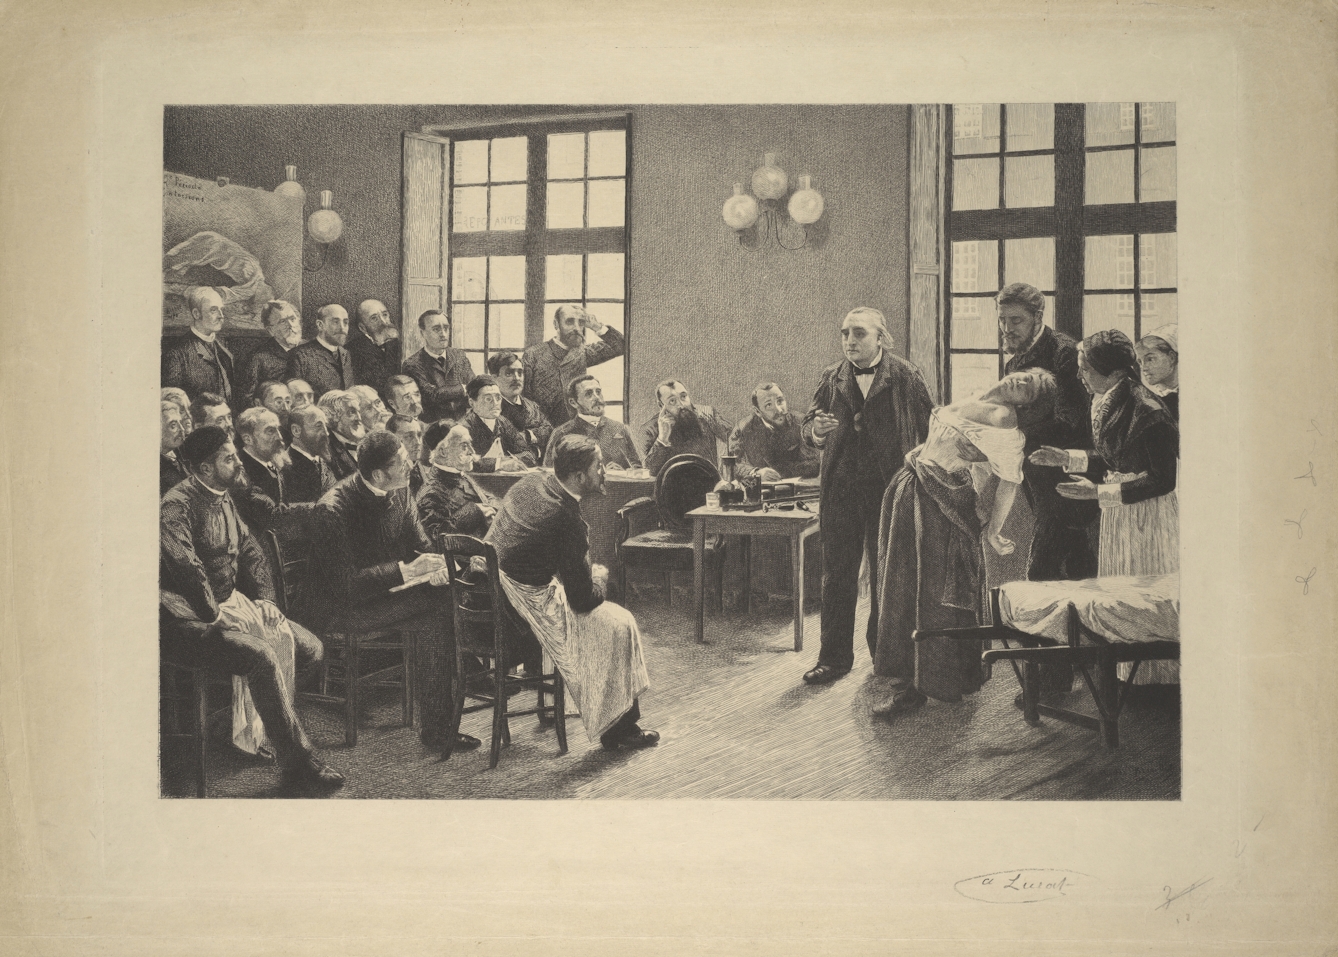 Jean-Martin Charcot demonstrating hysteria in a patient at the Salpetriere. Lithograph after P.A.A. Brouillet, 1887